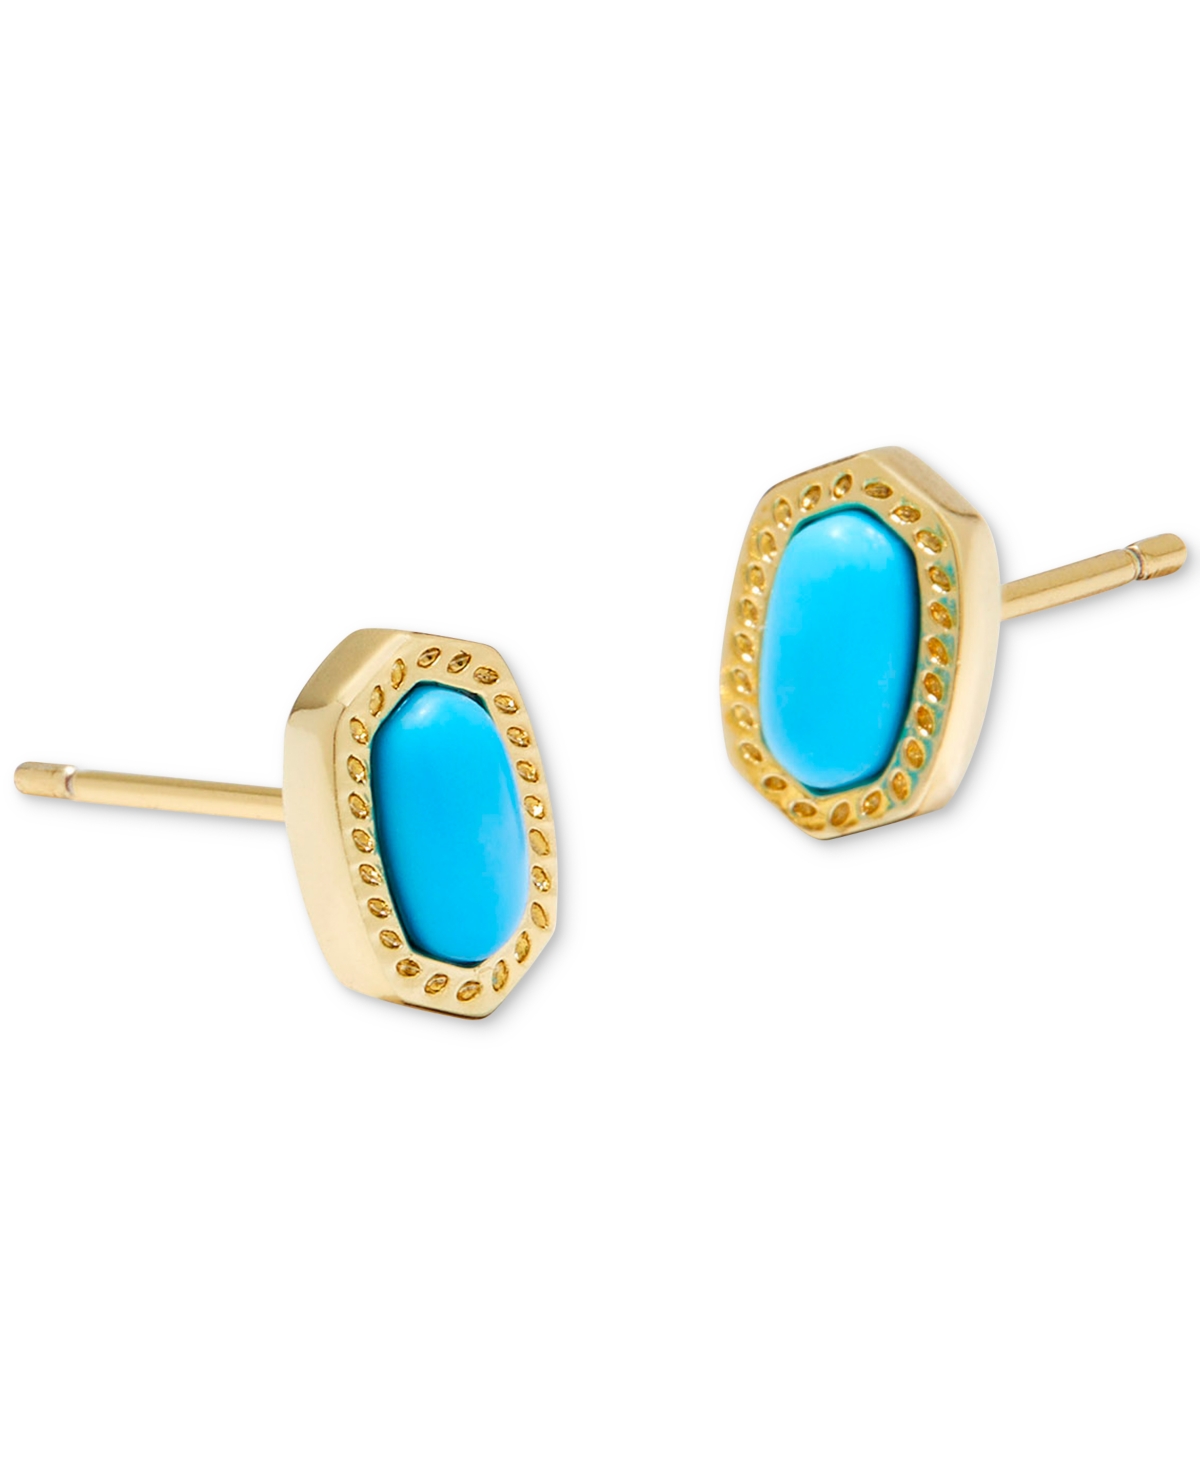 Kendra Scott 14k Gold-plated Oval Stone Stud Earrings In Turquoise Magnesite